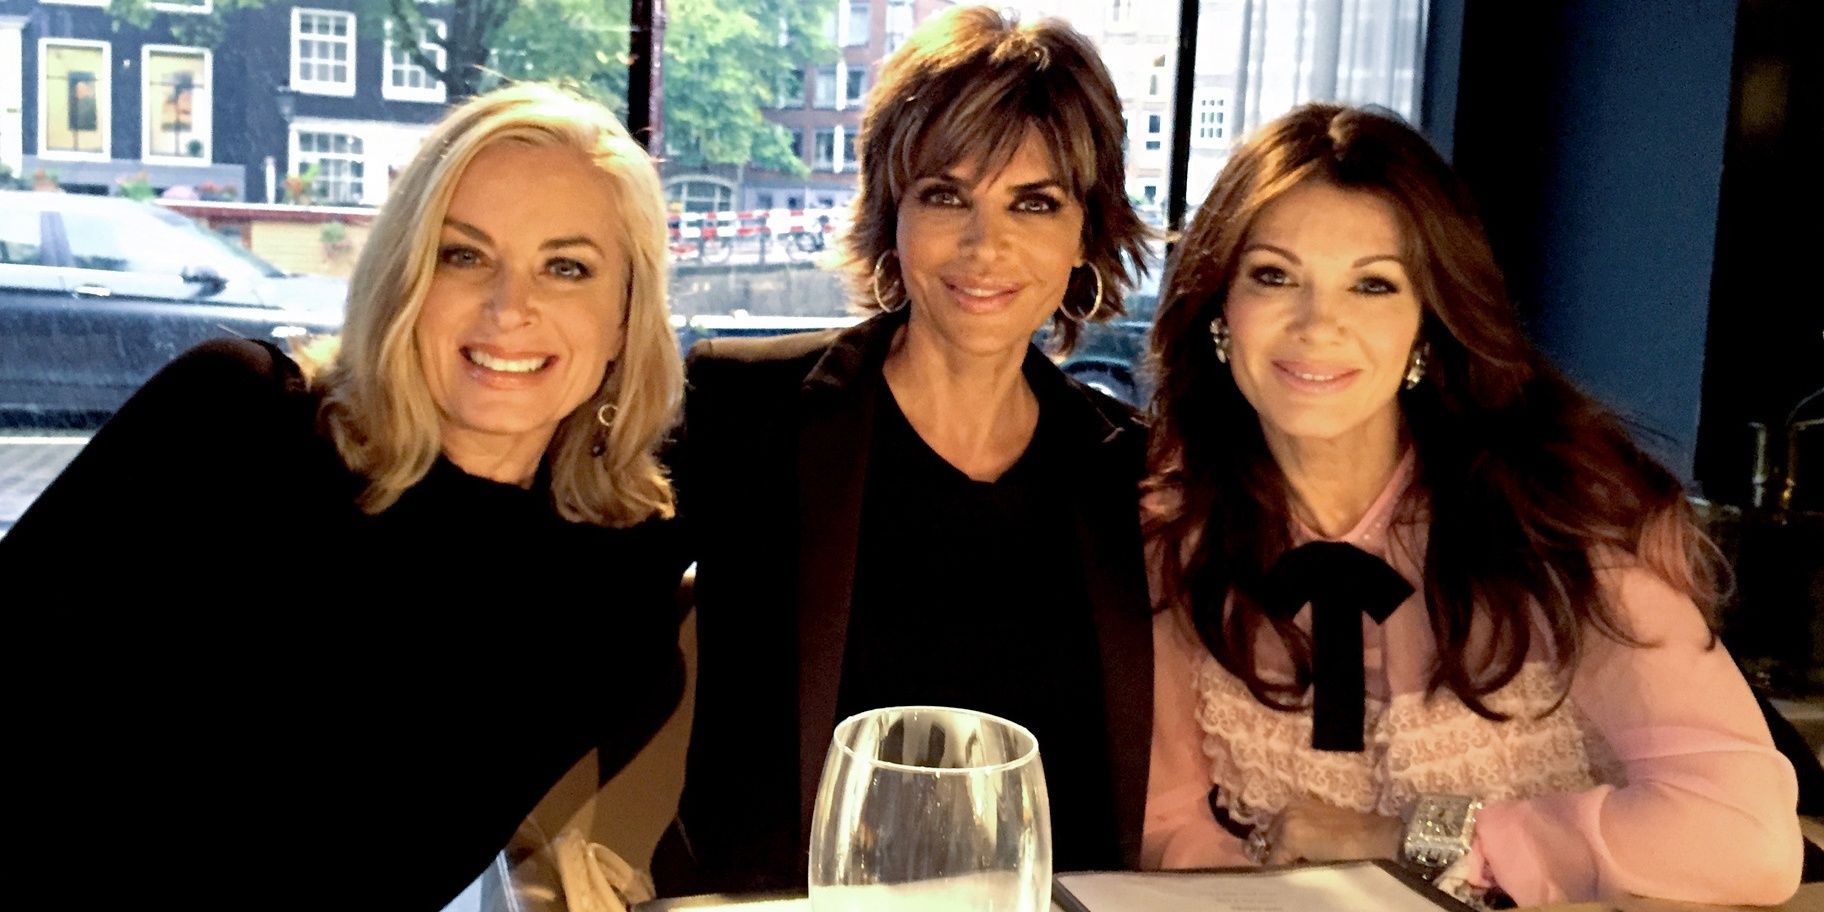 Eileen, Lisa, and Lisa smiling at dinner on an episode of RHOBH